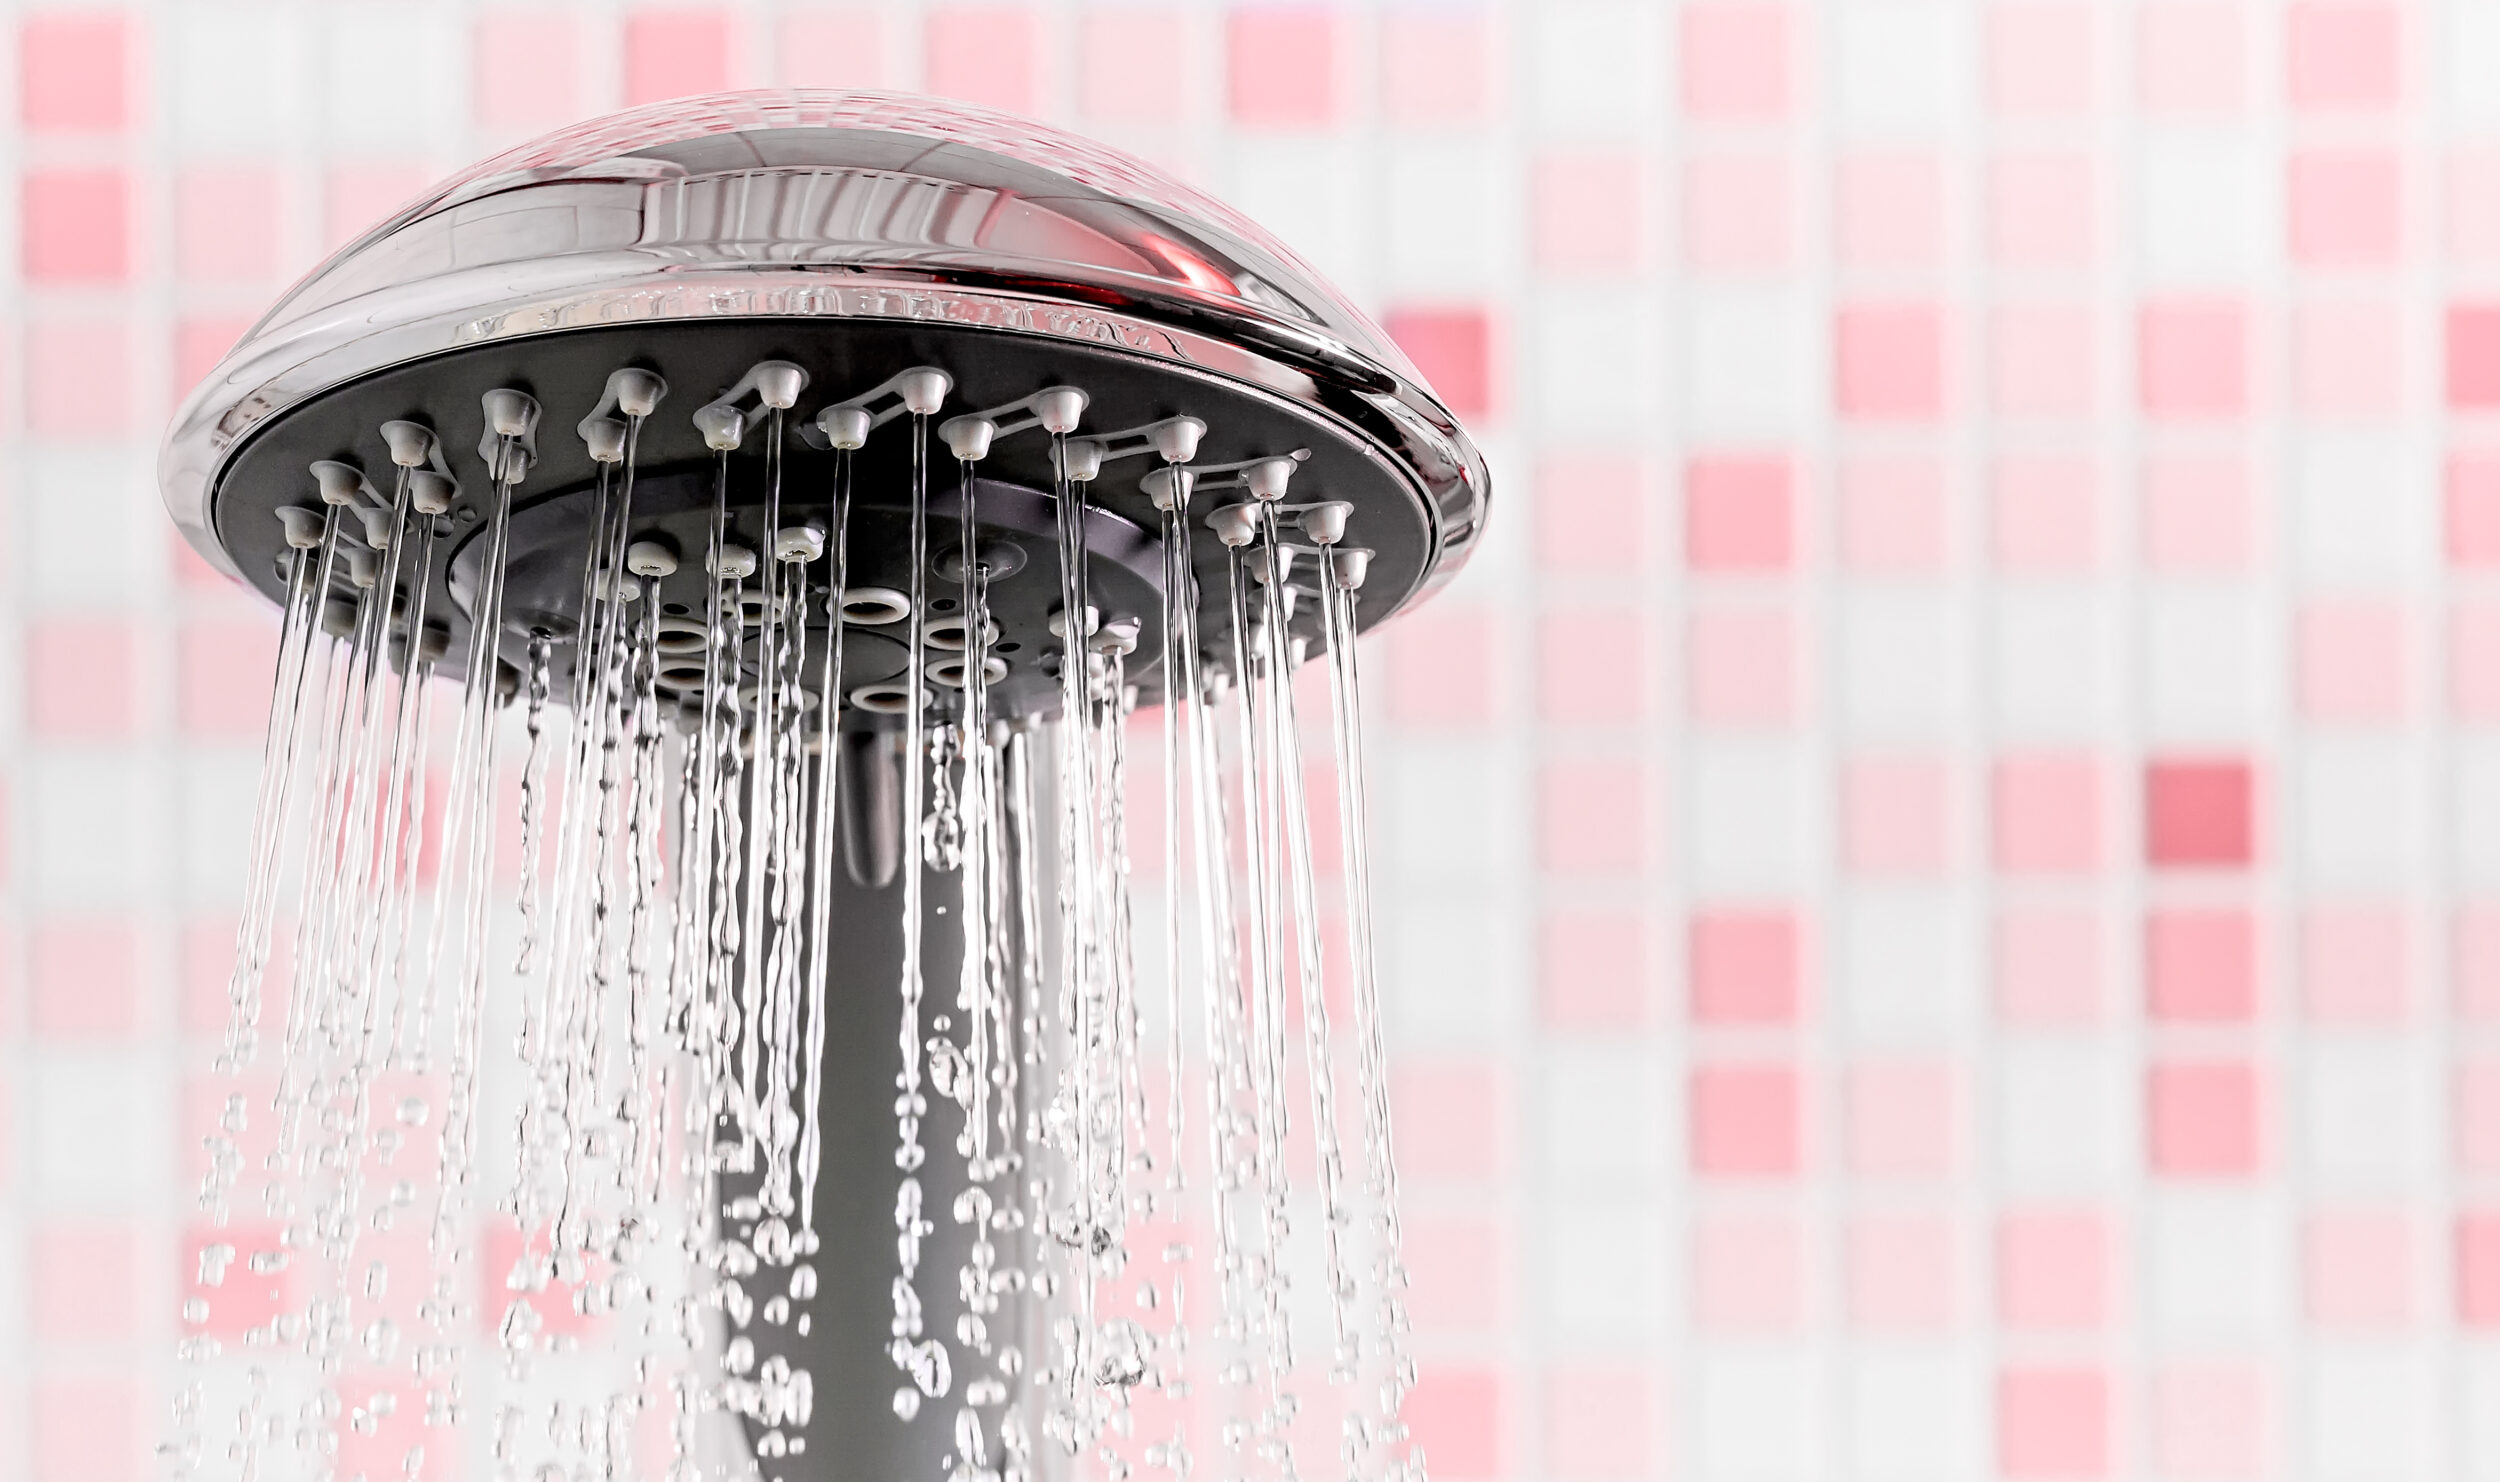 Shower head with flowing water stream in pink bathroom